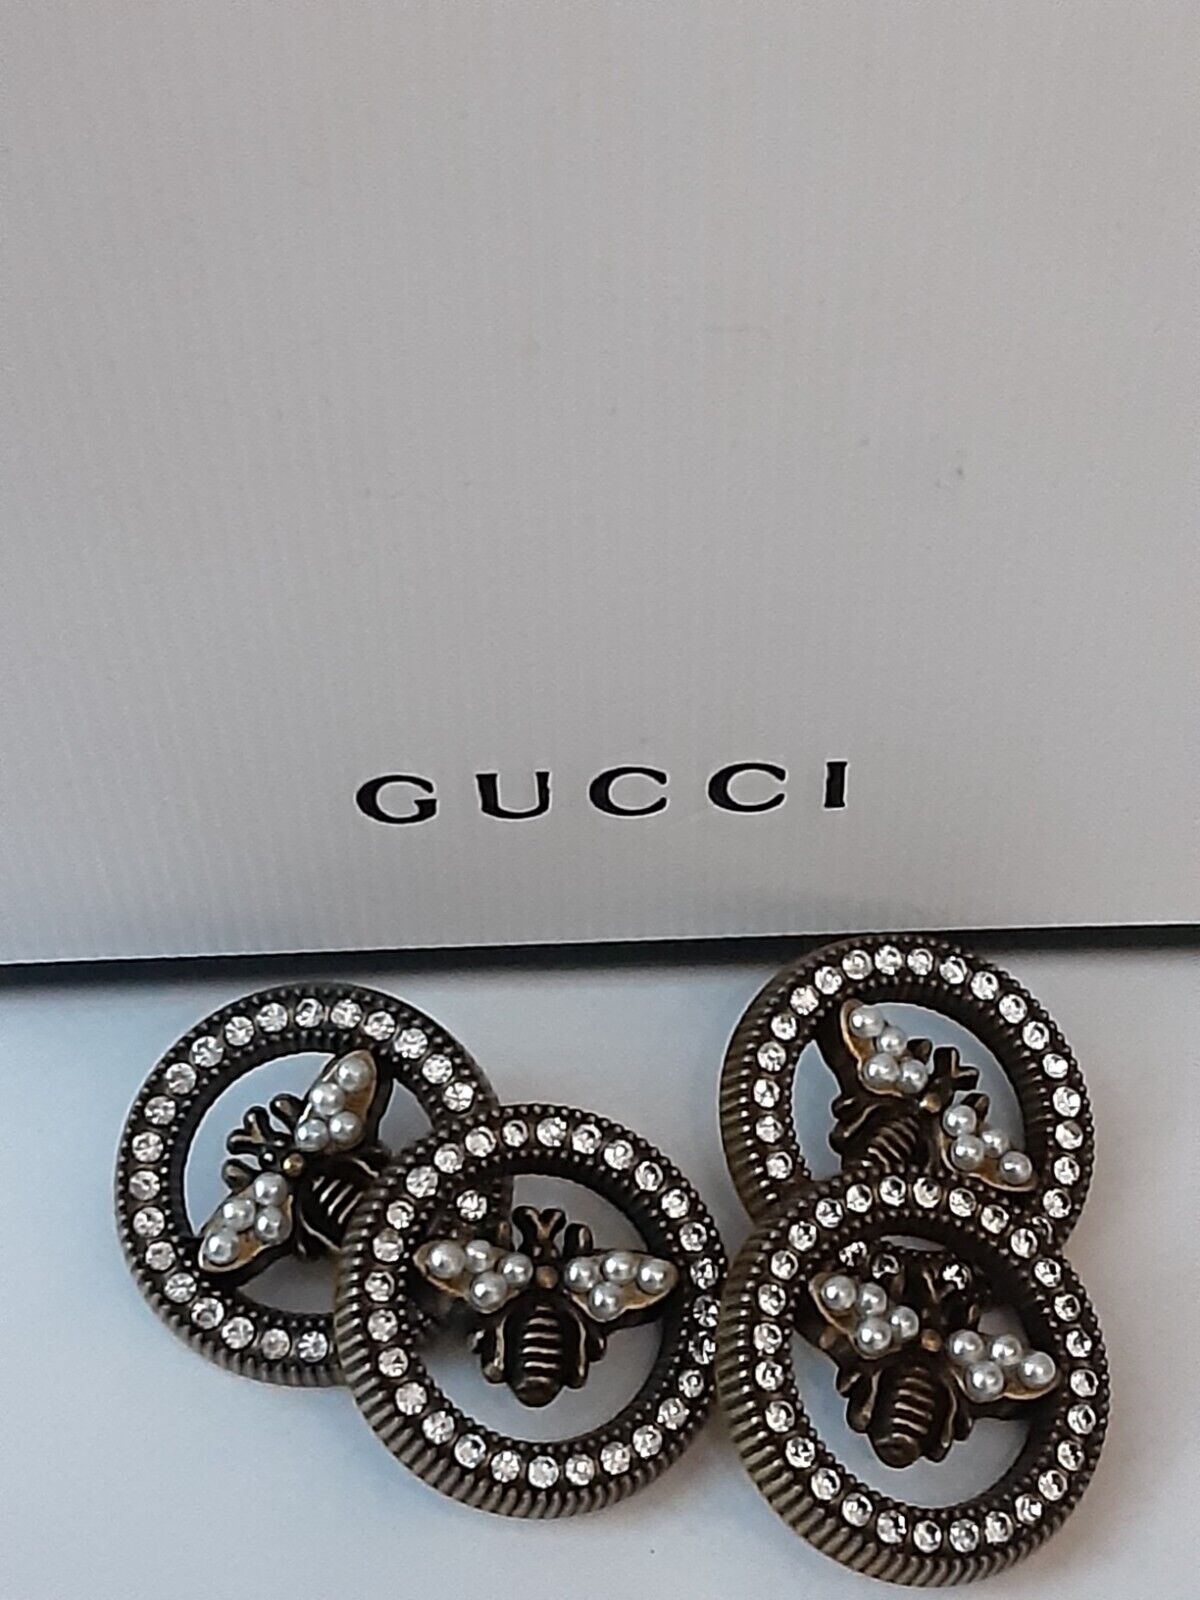 4 Gucci  BUTTONS  bronze  24 mm 1 inch Pearls 4  pieces  bees